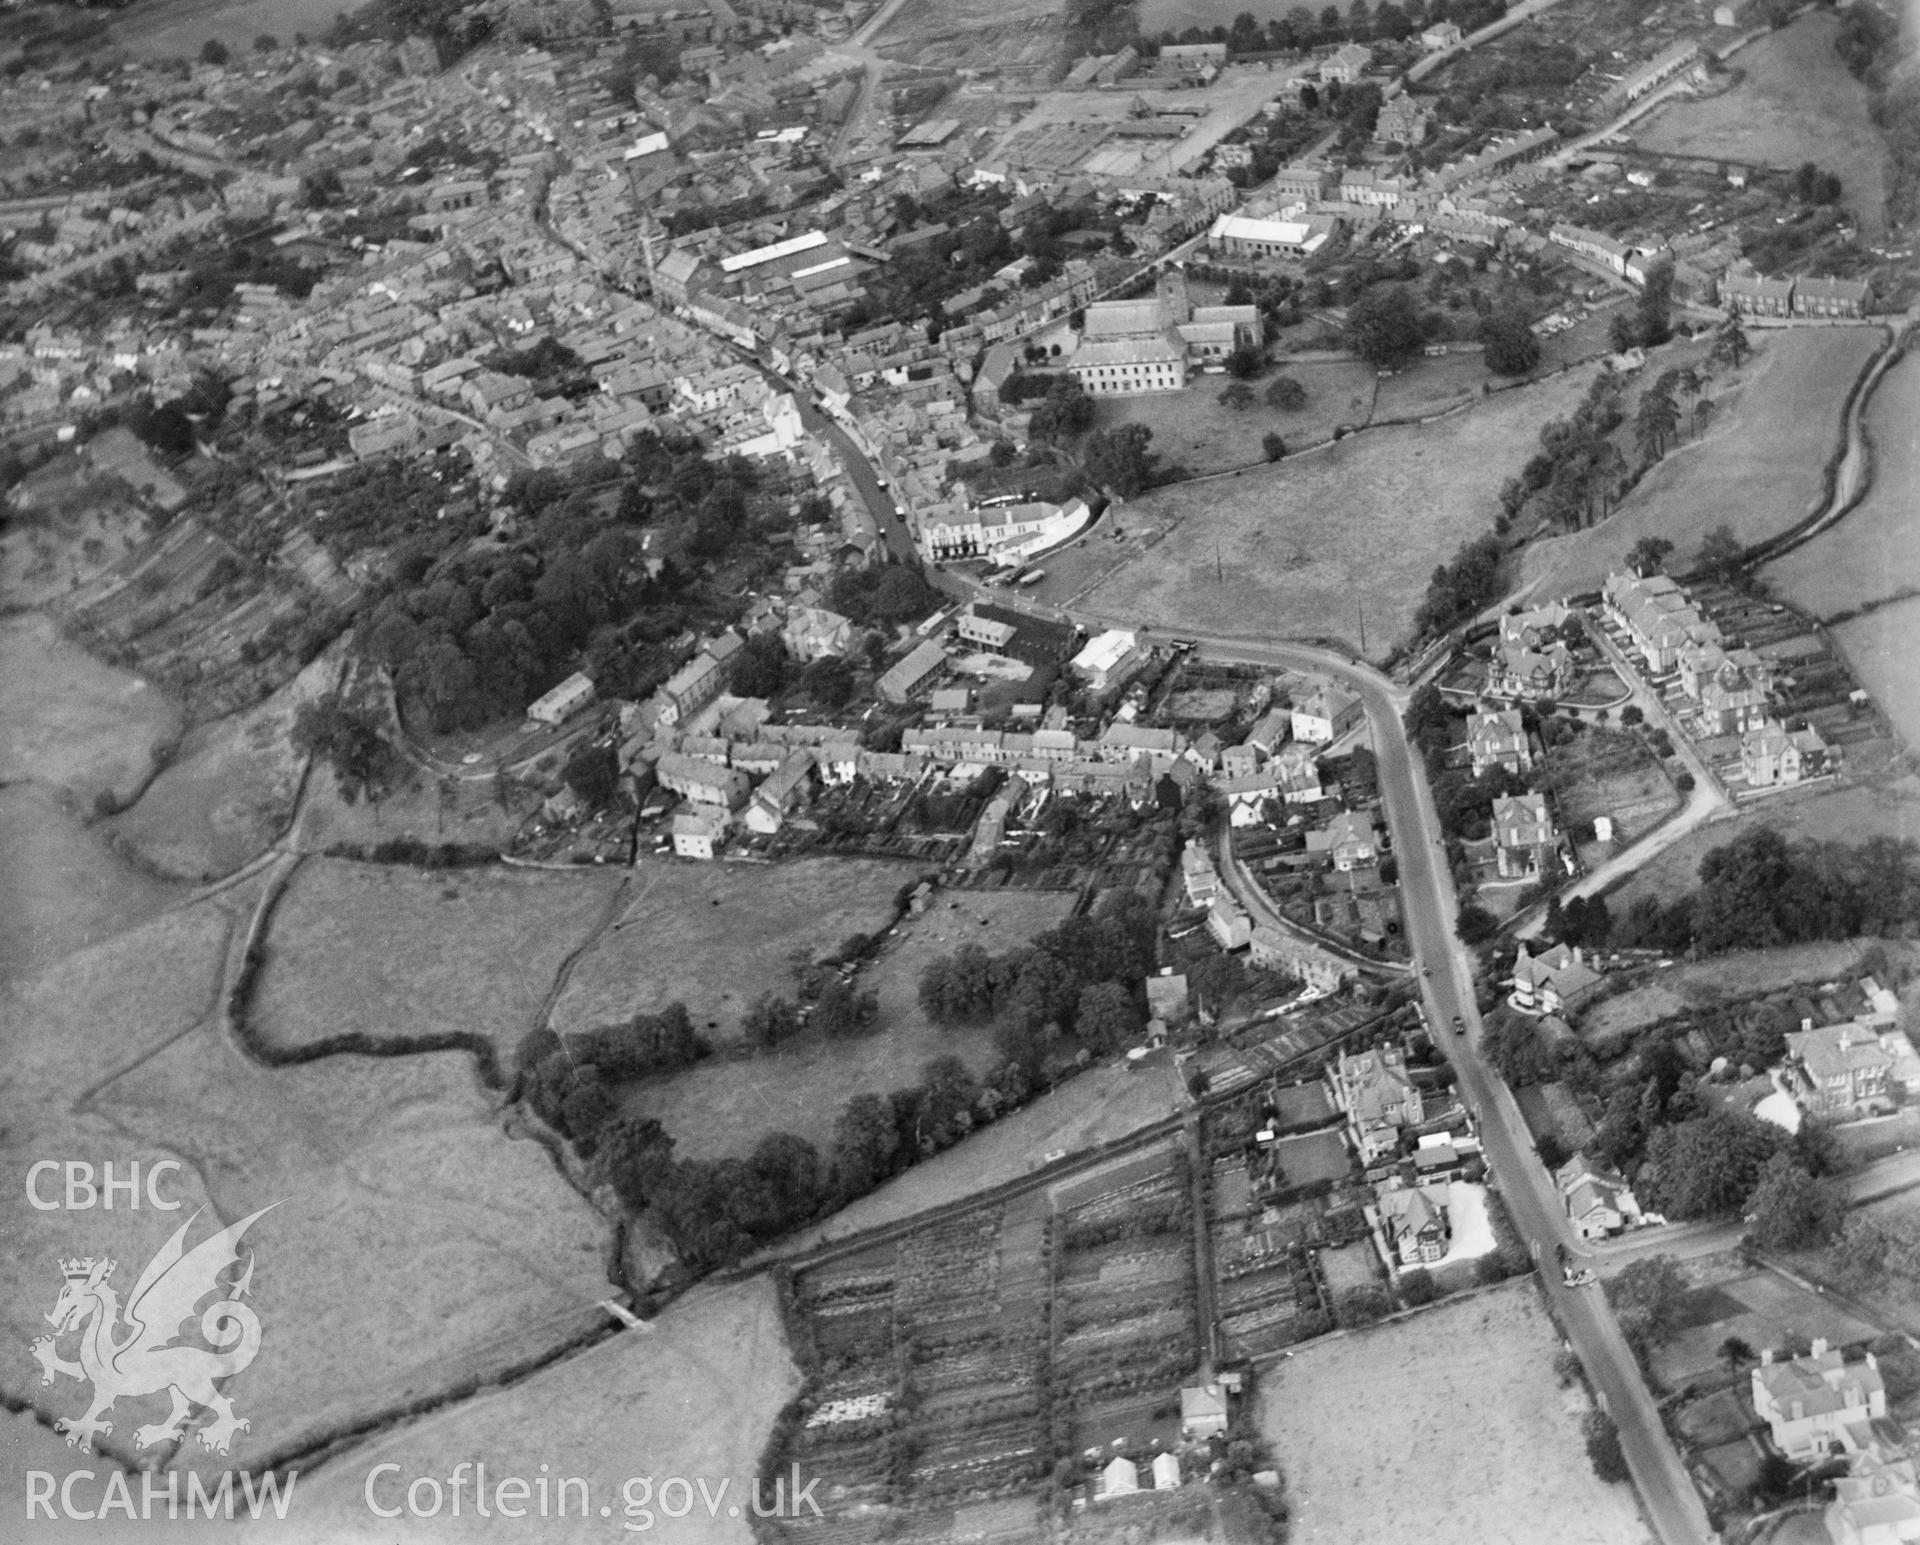 General view of Abergavenny, oblique aerial view. 5?x4? black and white glass plate negative.